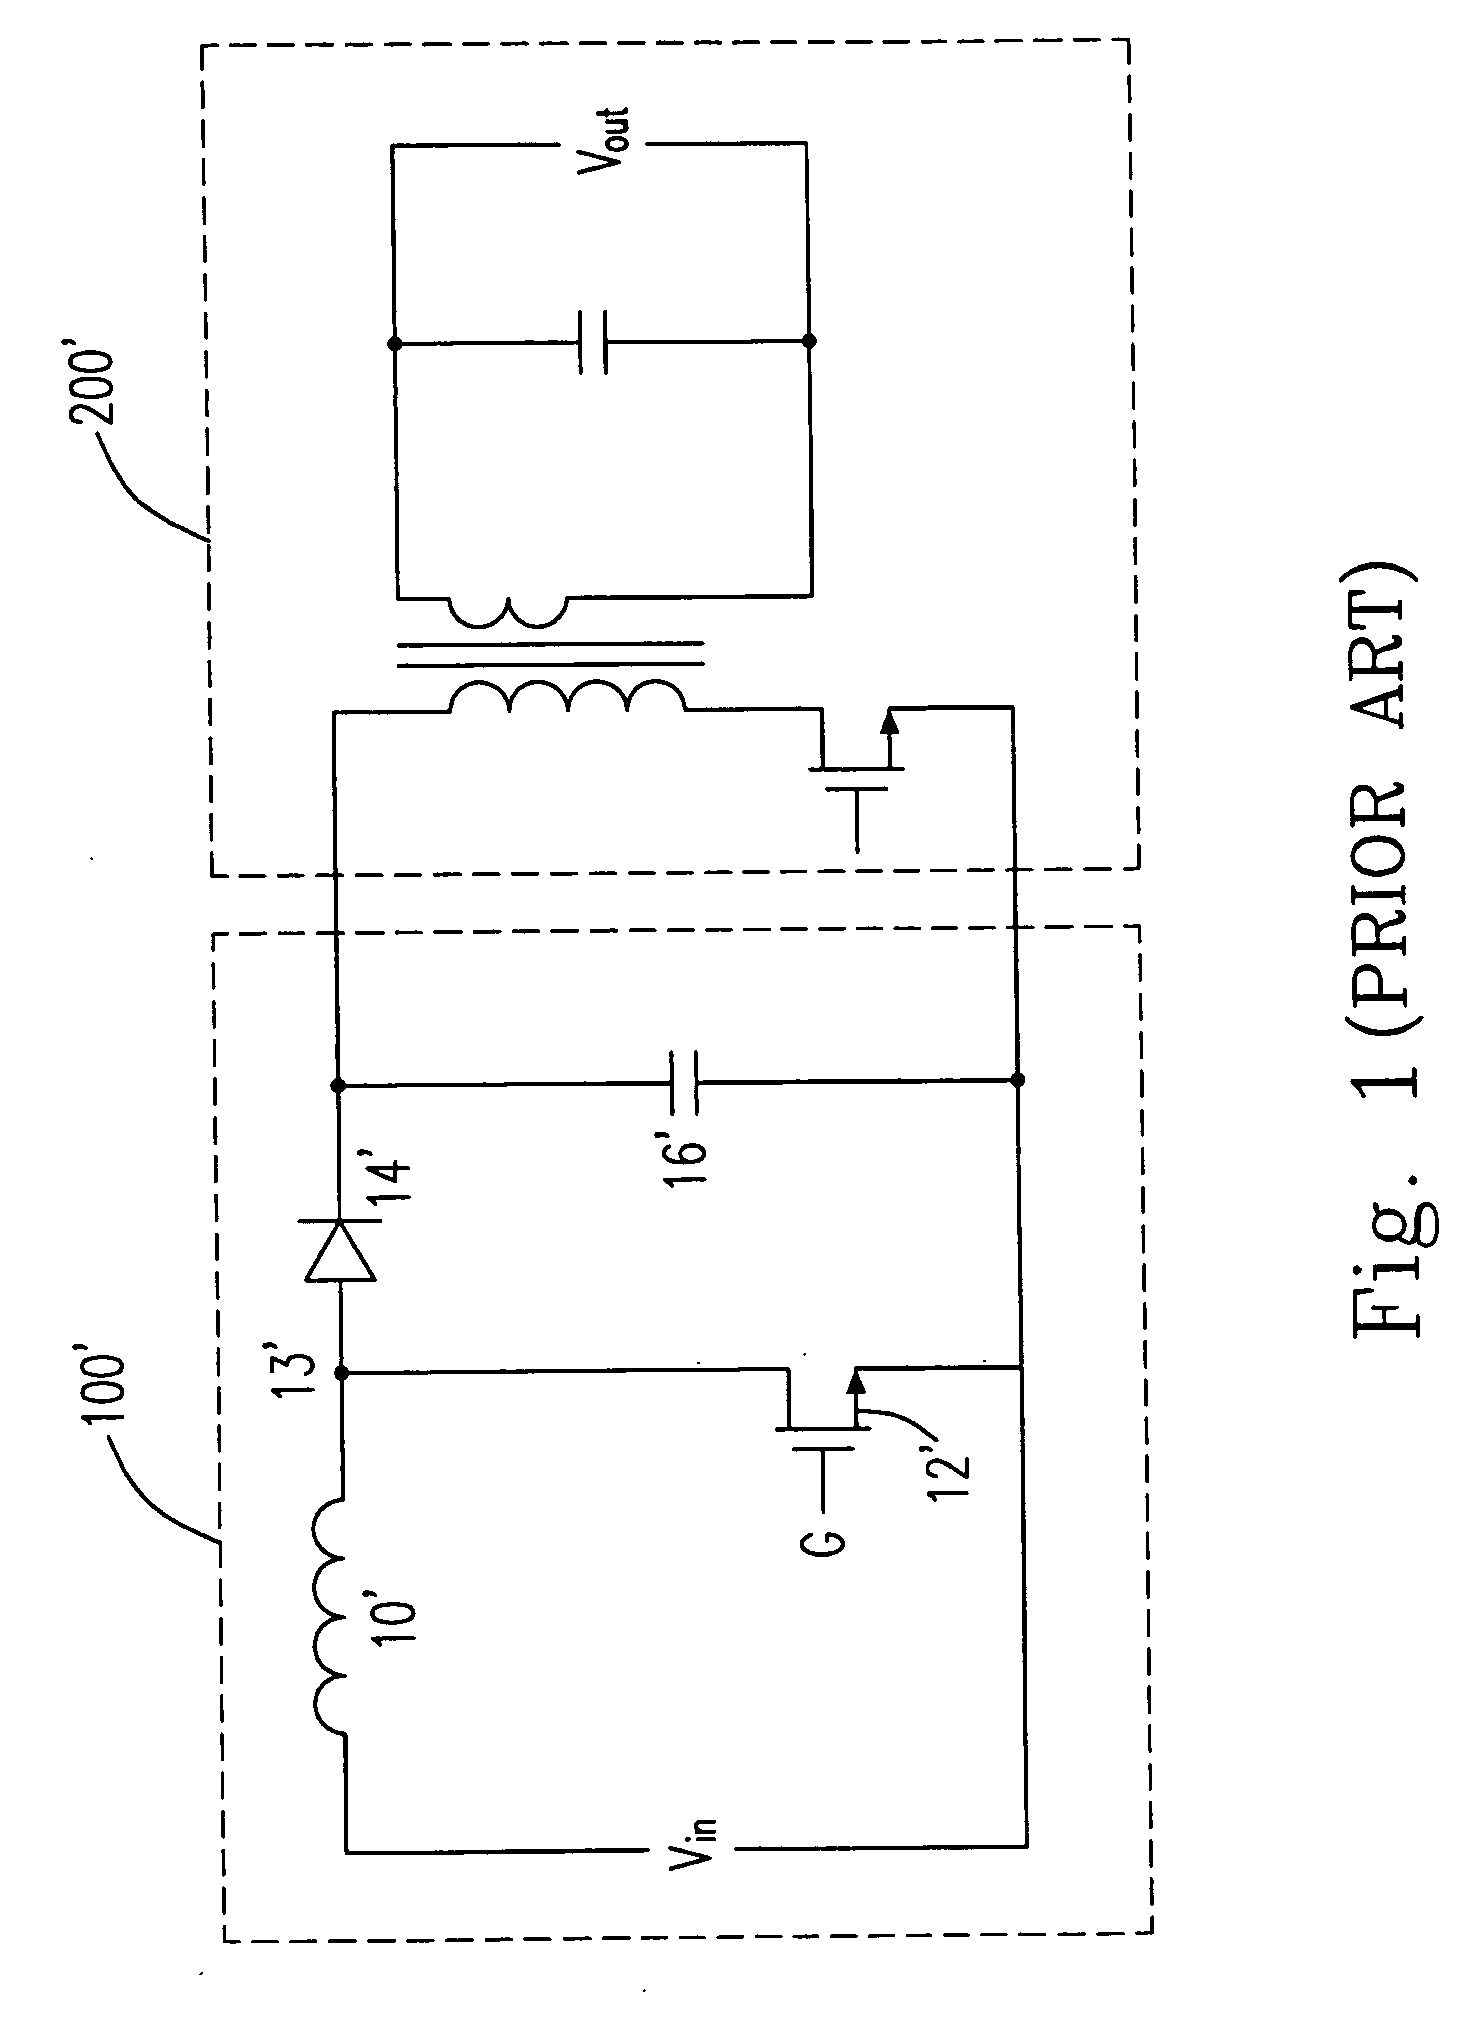 High efficiency power converter with synchronous rectification